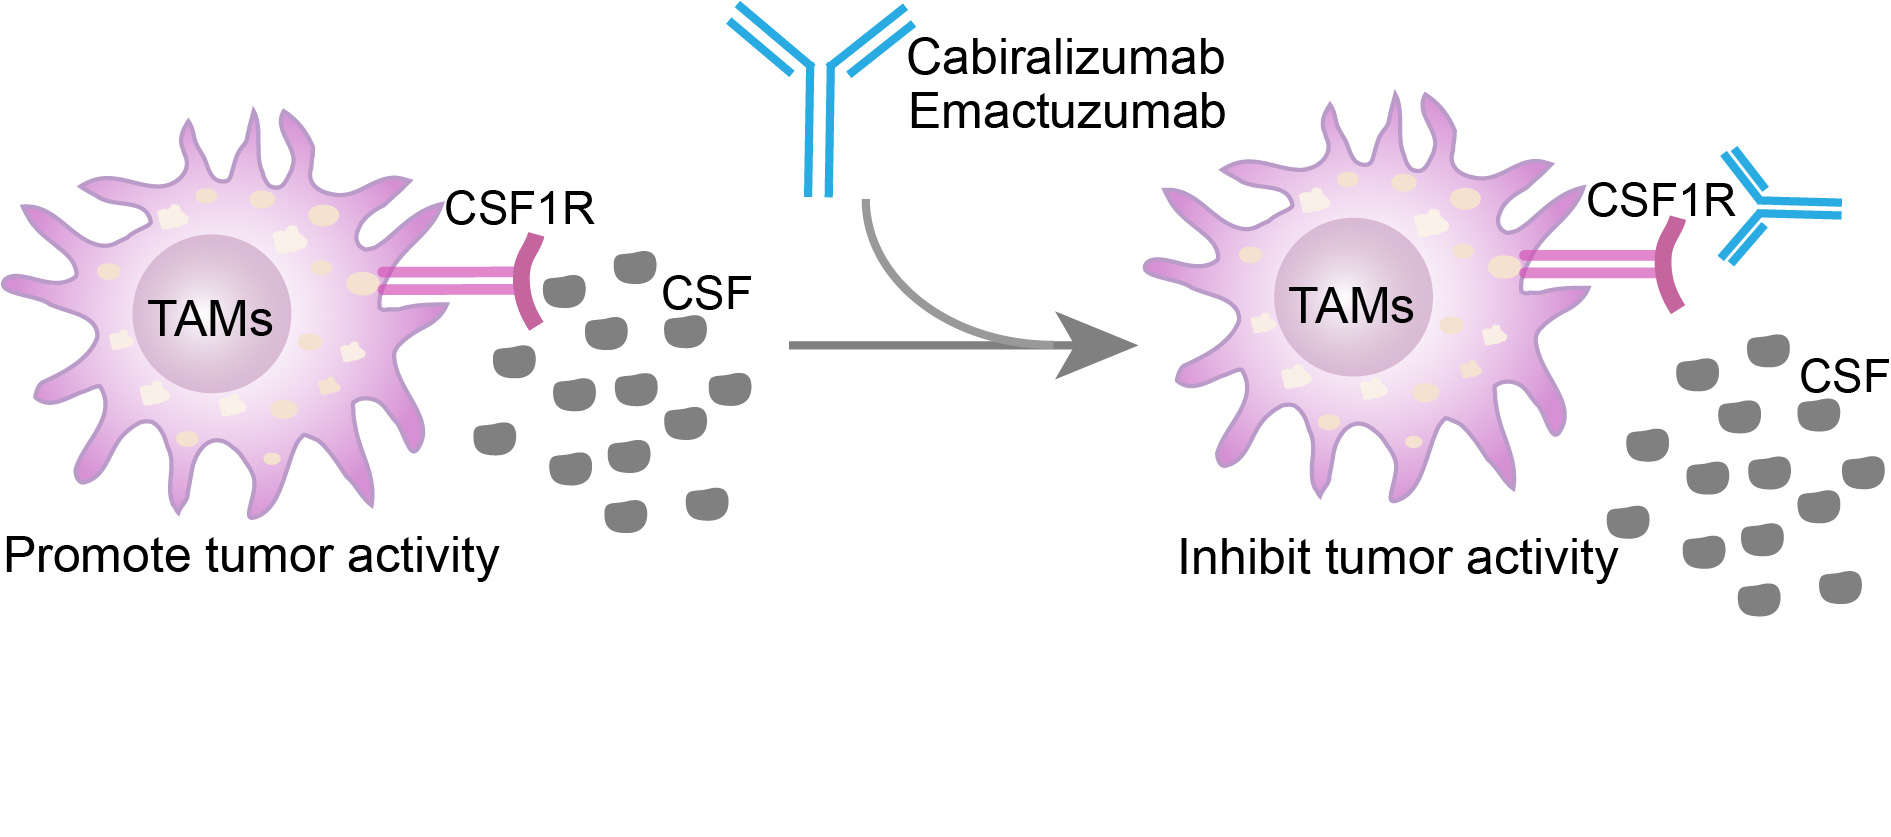 Mechanism of action of Cabiralizumab